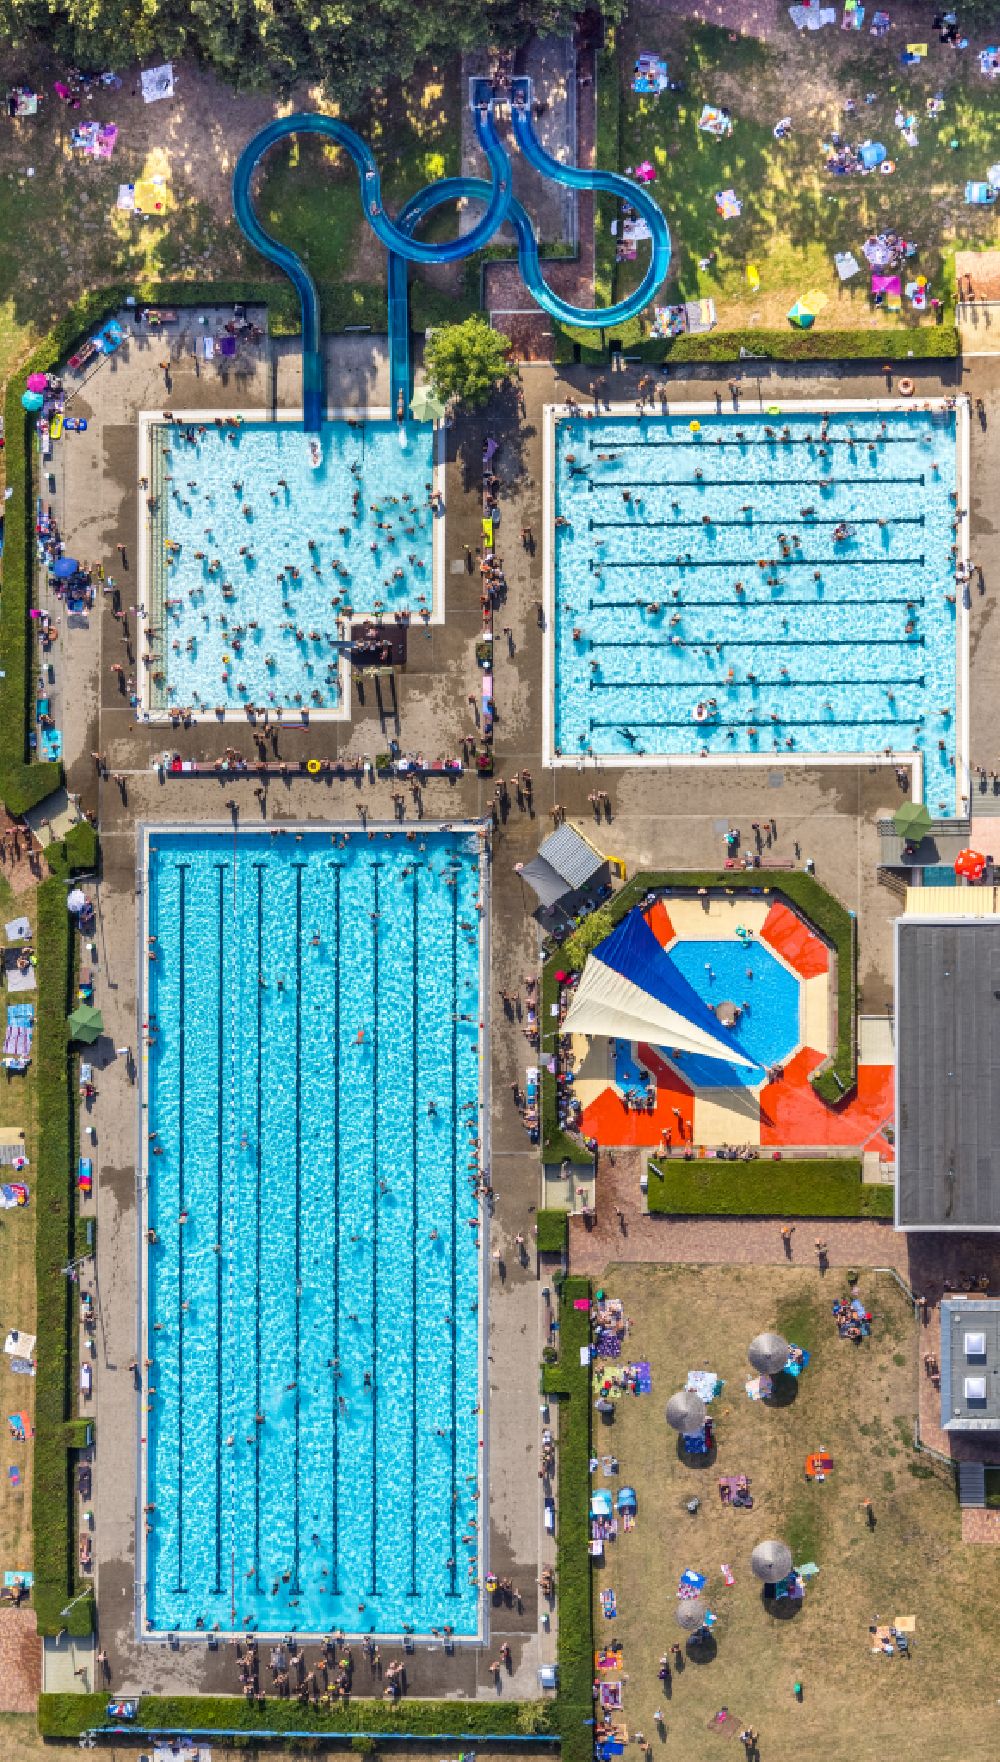 Hamm from the bird's eye view: Swimming pool of the Freibad Sued in the district Westtuennen in Hamm at Ruhrgebiet in the state North Rhine-Westphalia, Germany